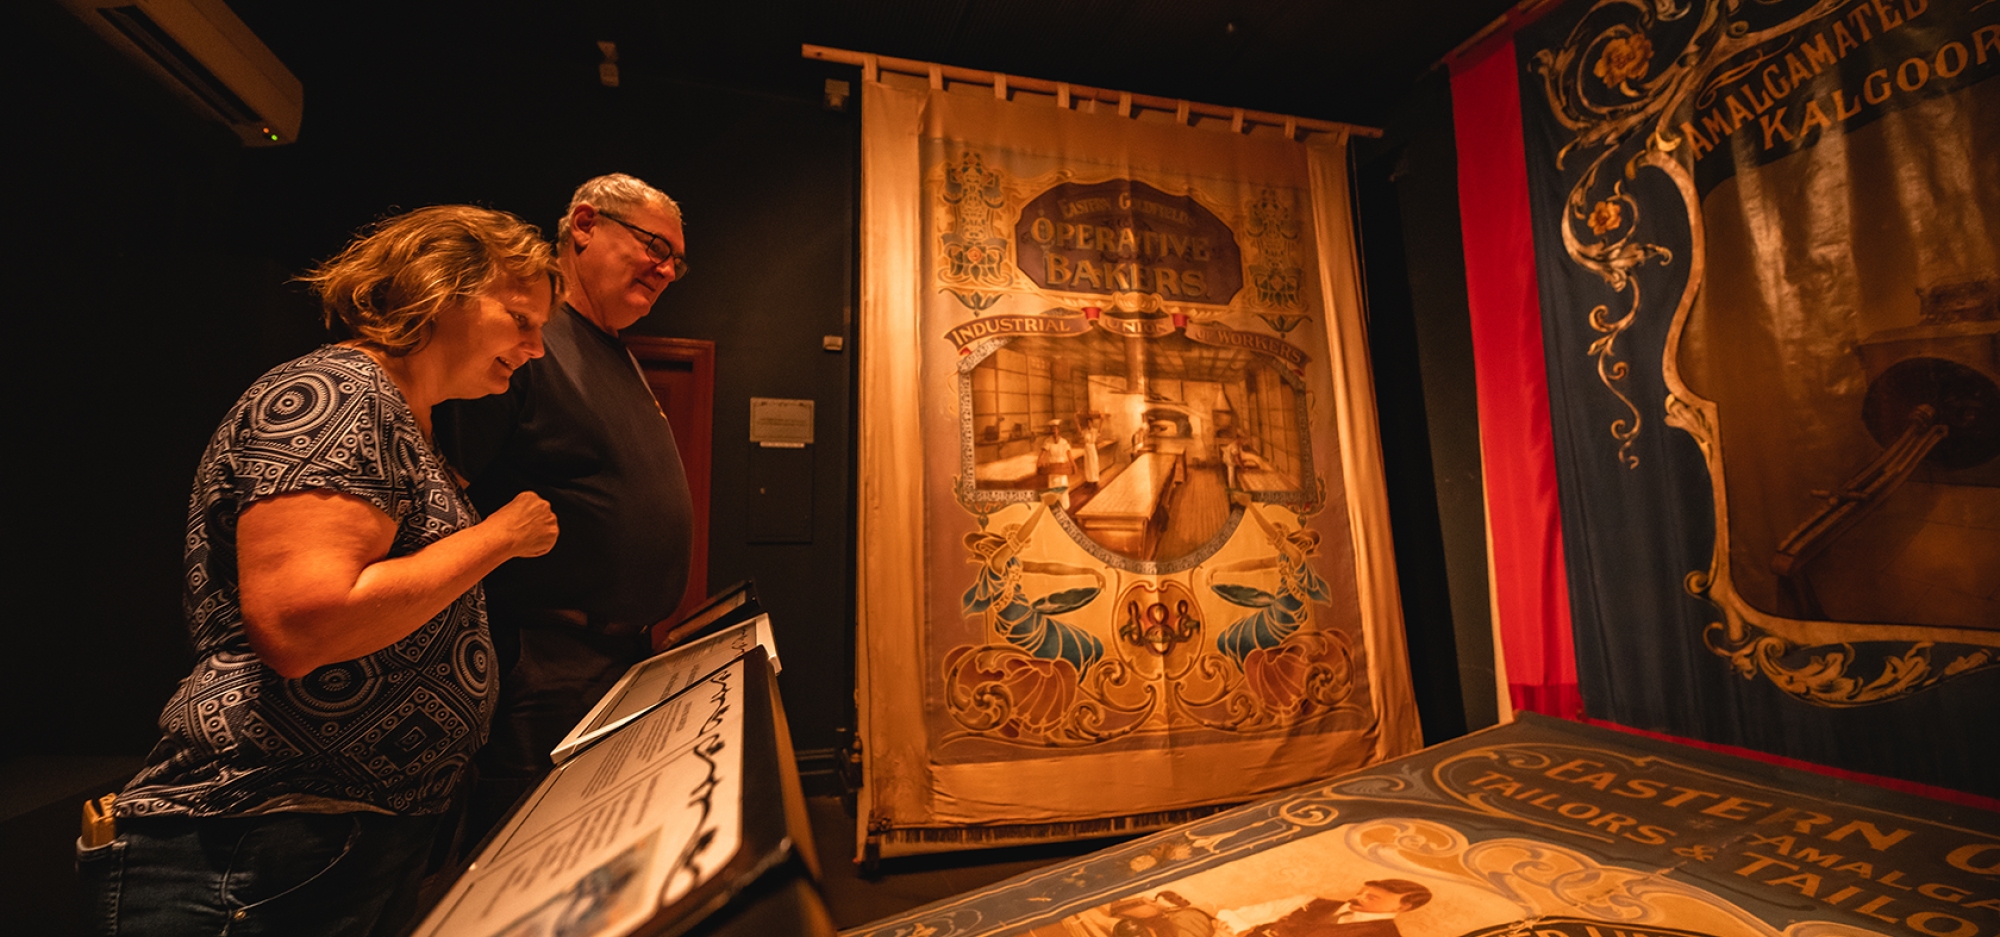 2 people observe a variety of banners on display in a dimly lit museum gallery